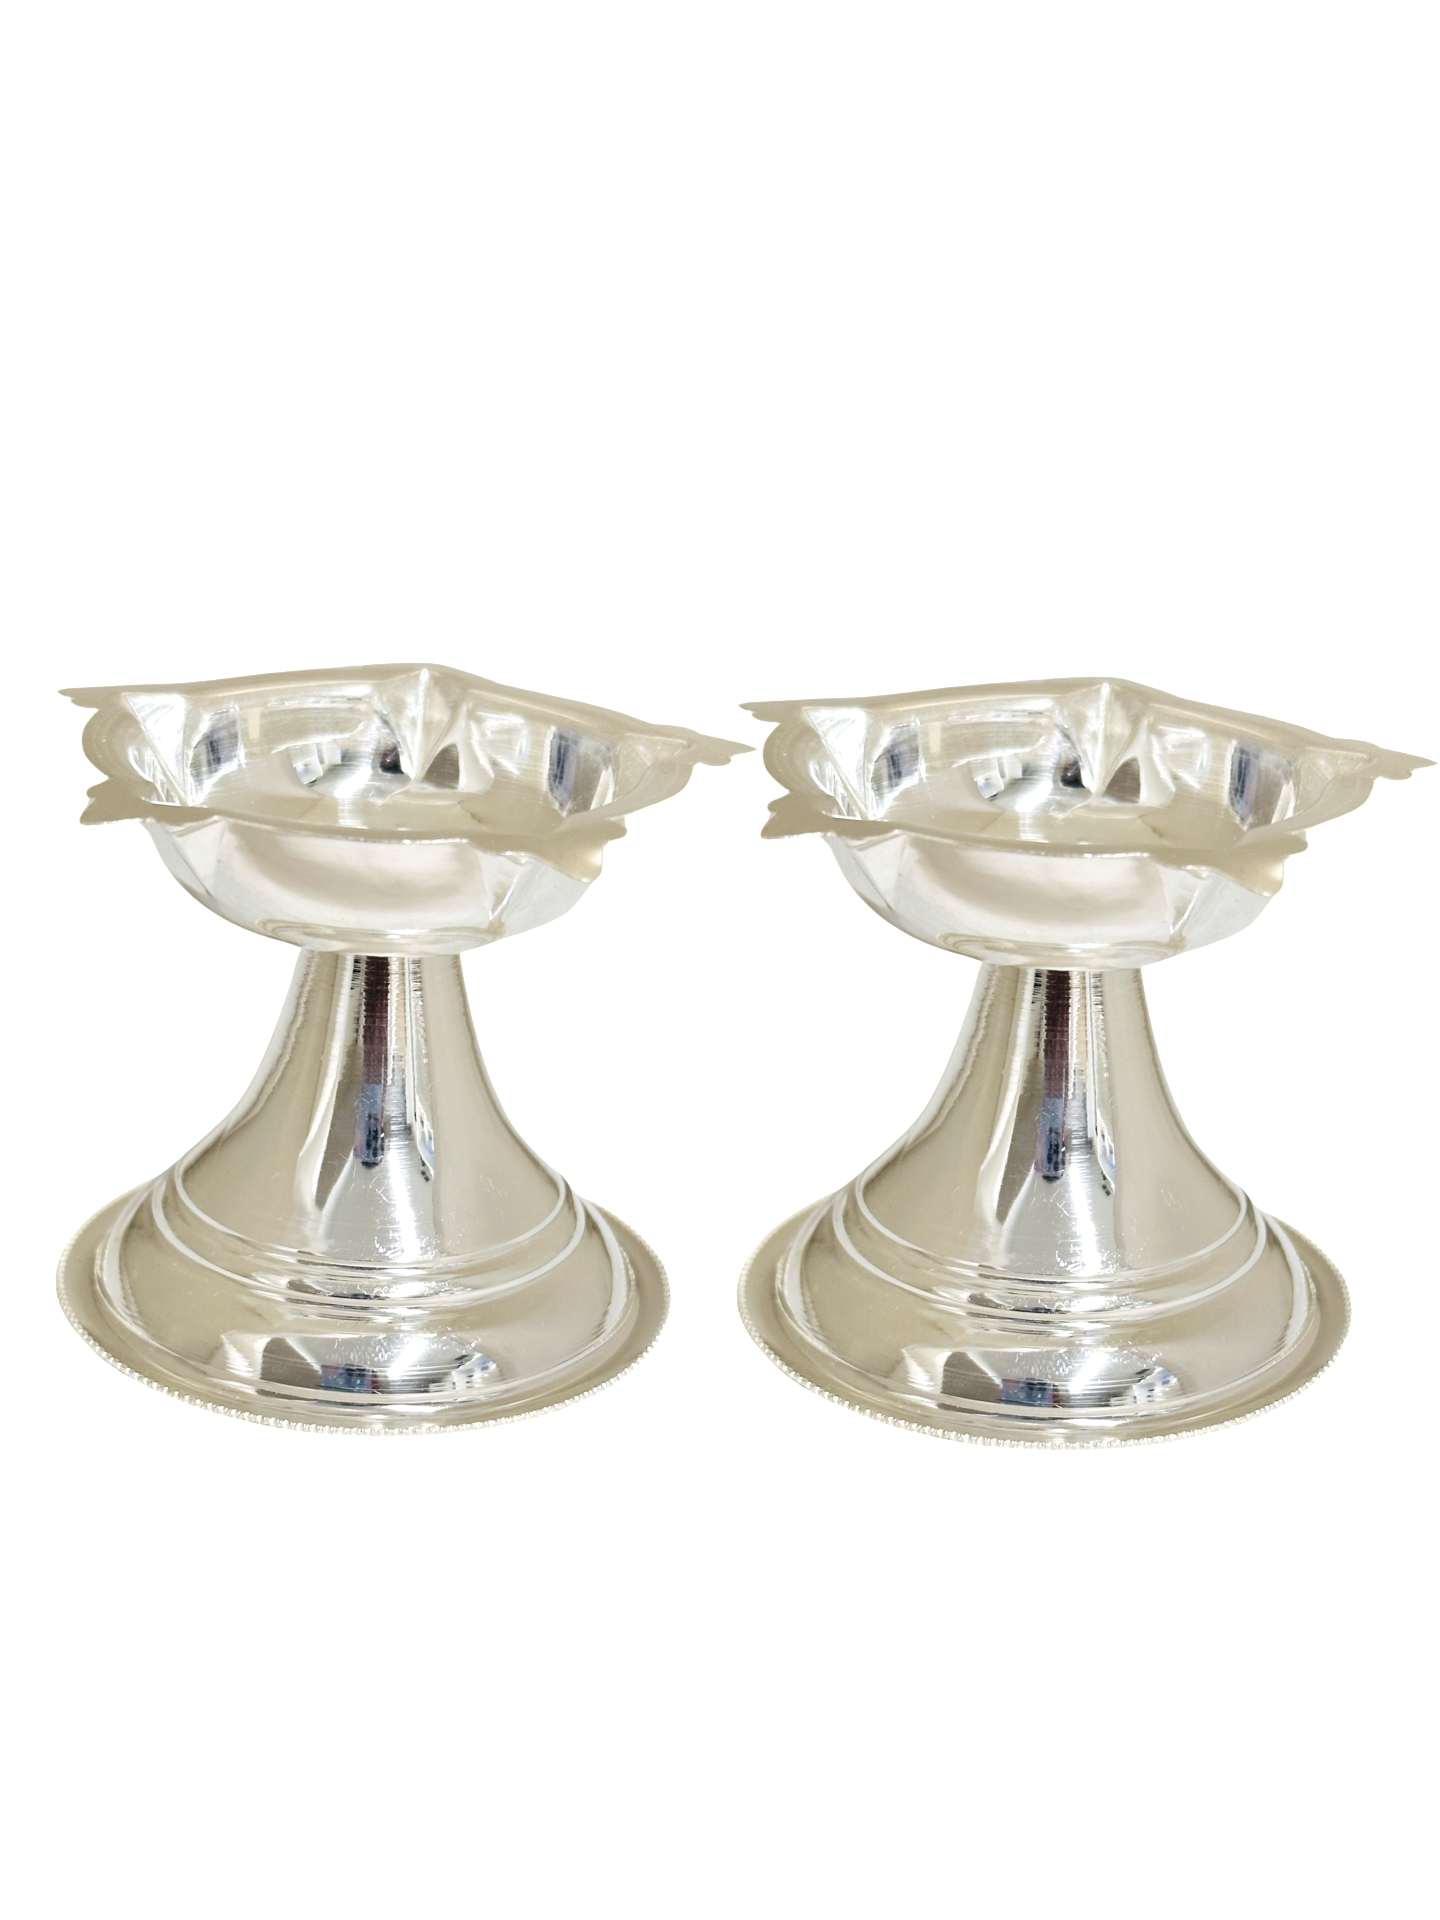 925 Silver Plain Deepam with five Beaks 2.25 Inches